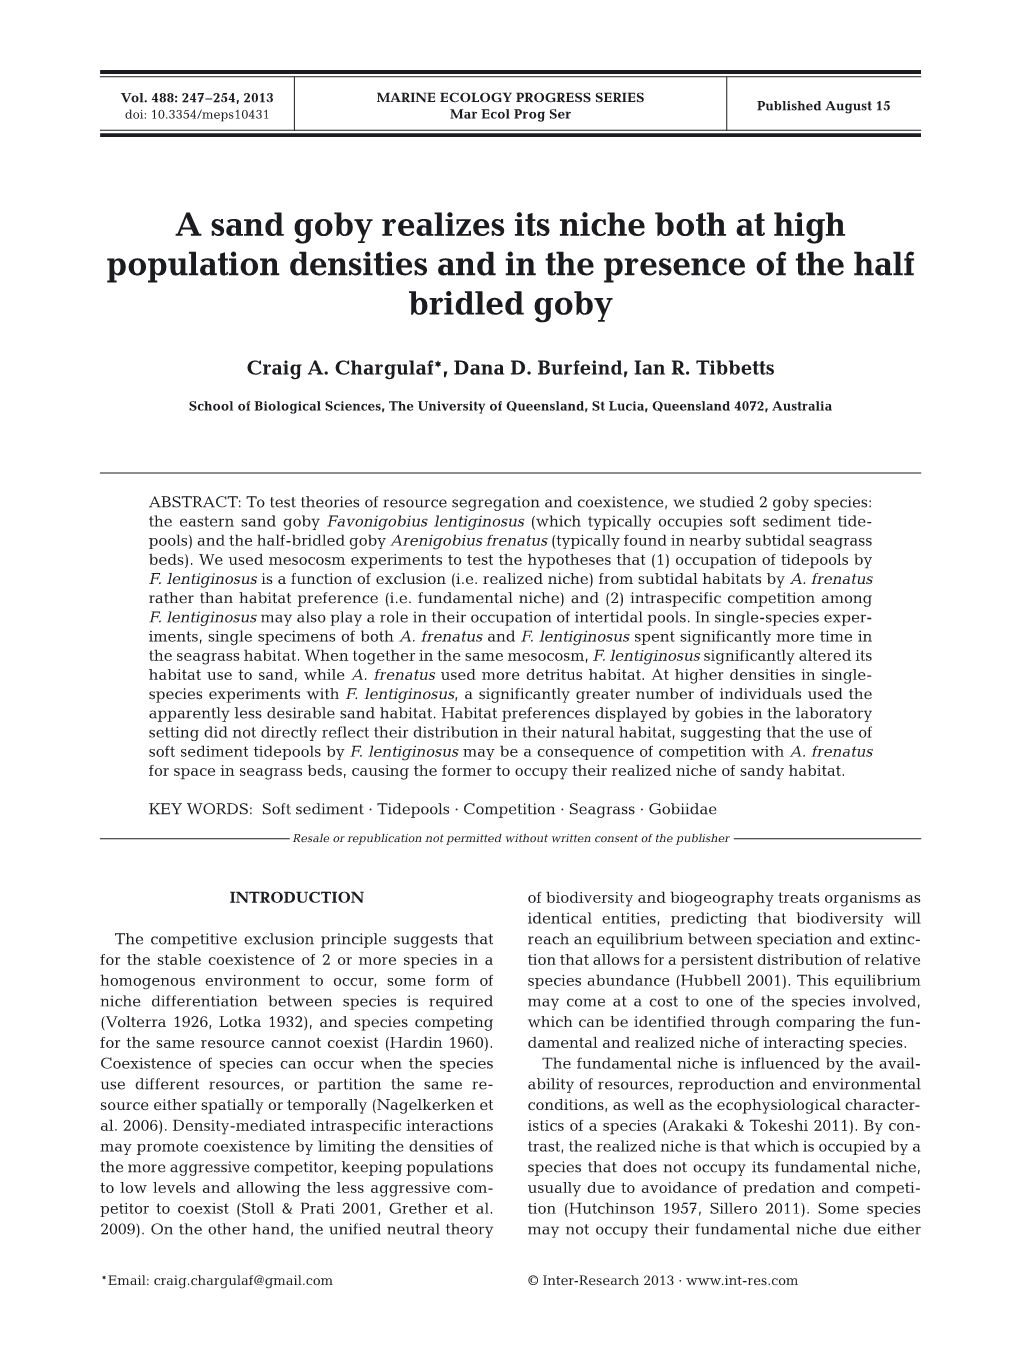 A Sand Goby Realizes Its Niche Both at High Population Densities and in the Presence of the Half Bridled Goby